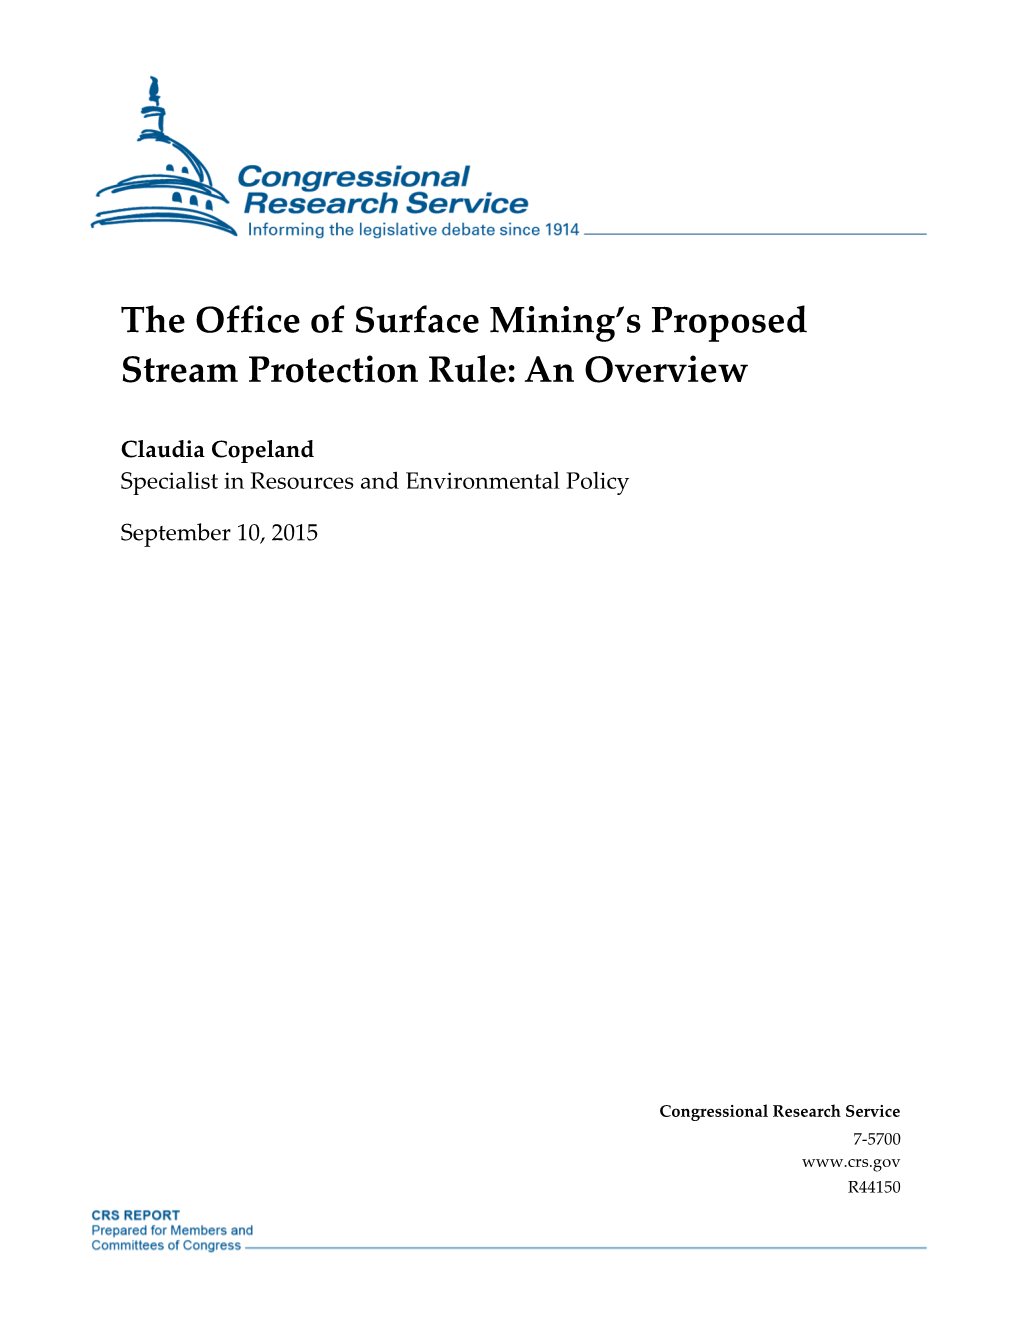 The Office of Surface Mining's Proposed Stream Protection Rule: An